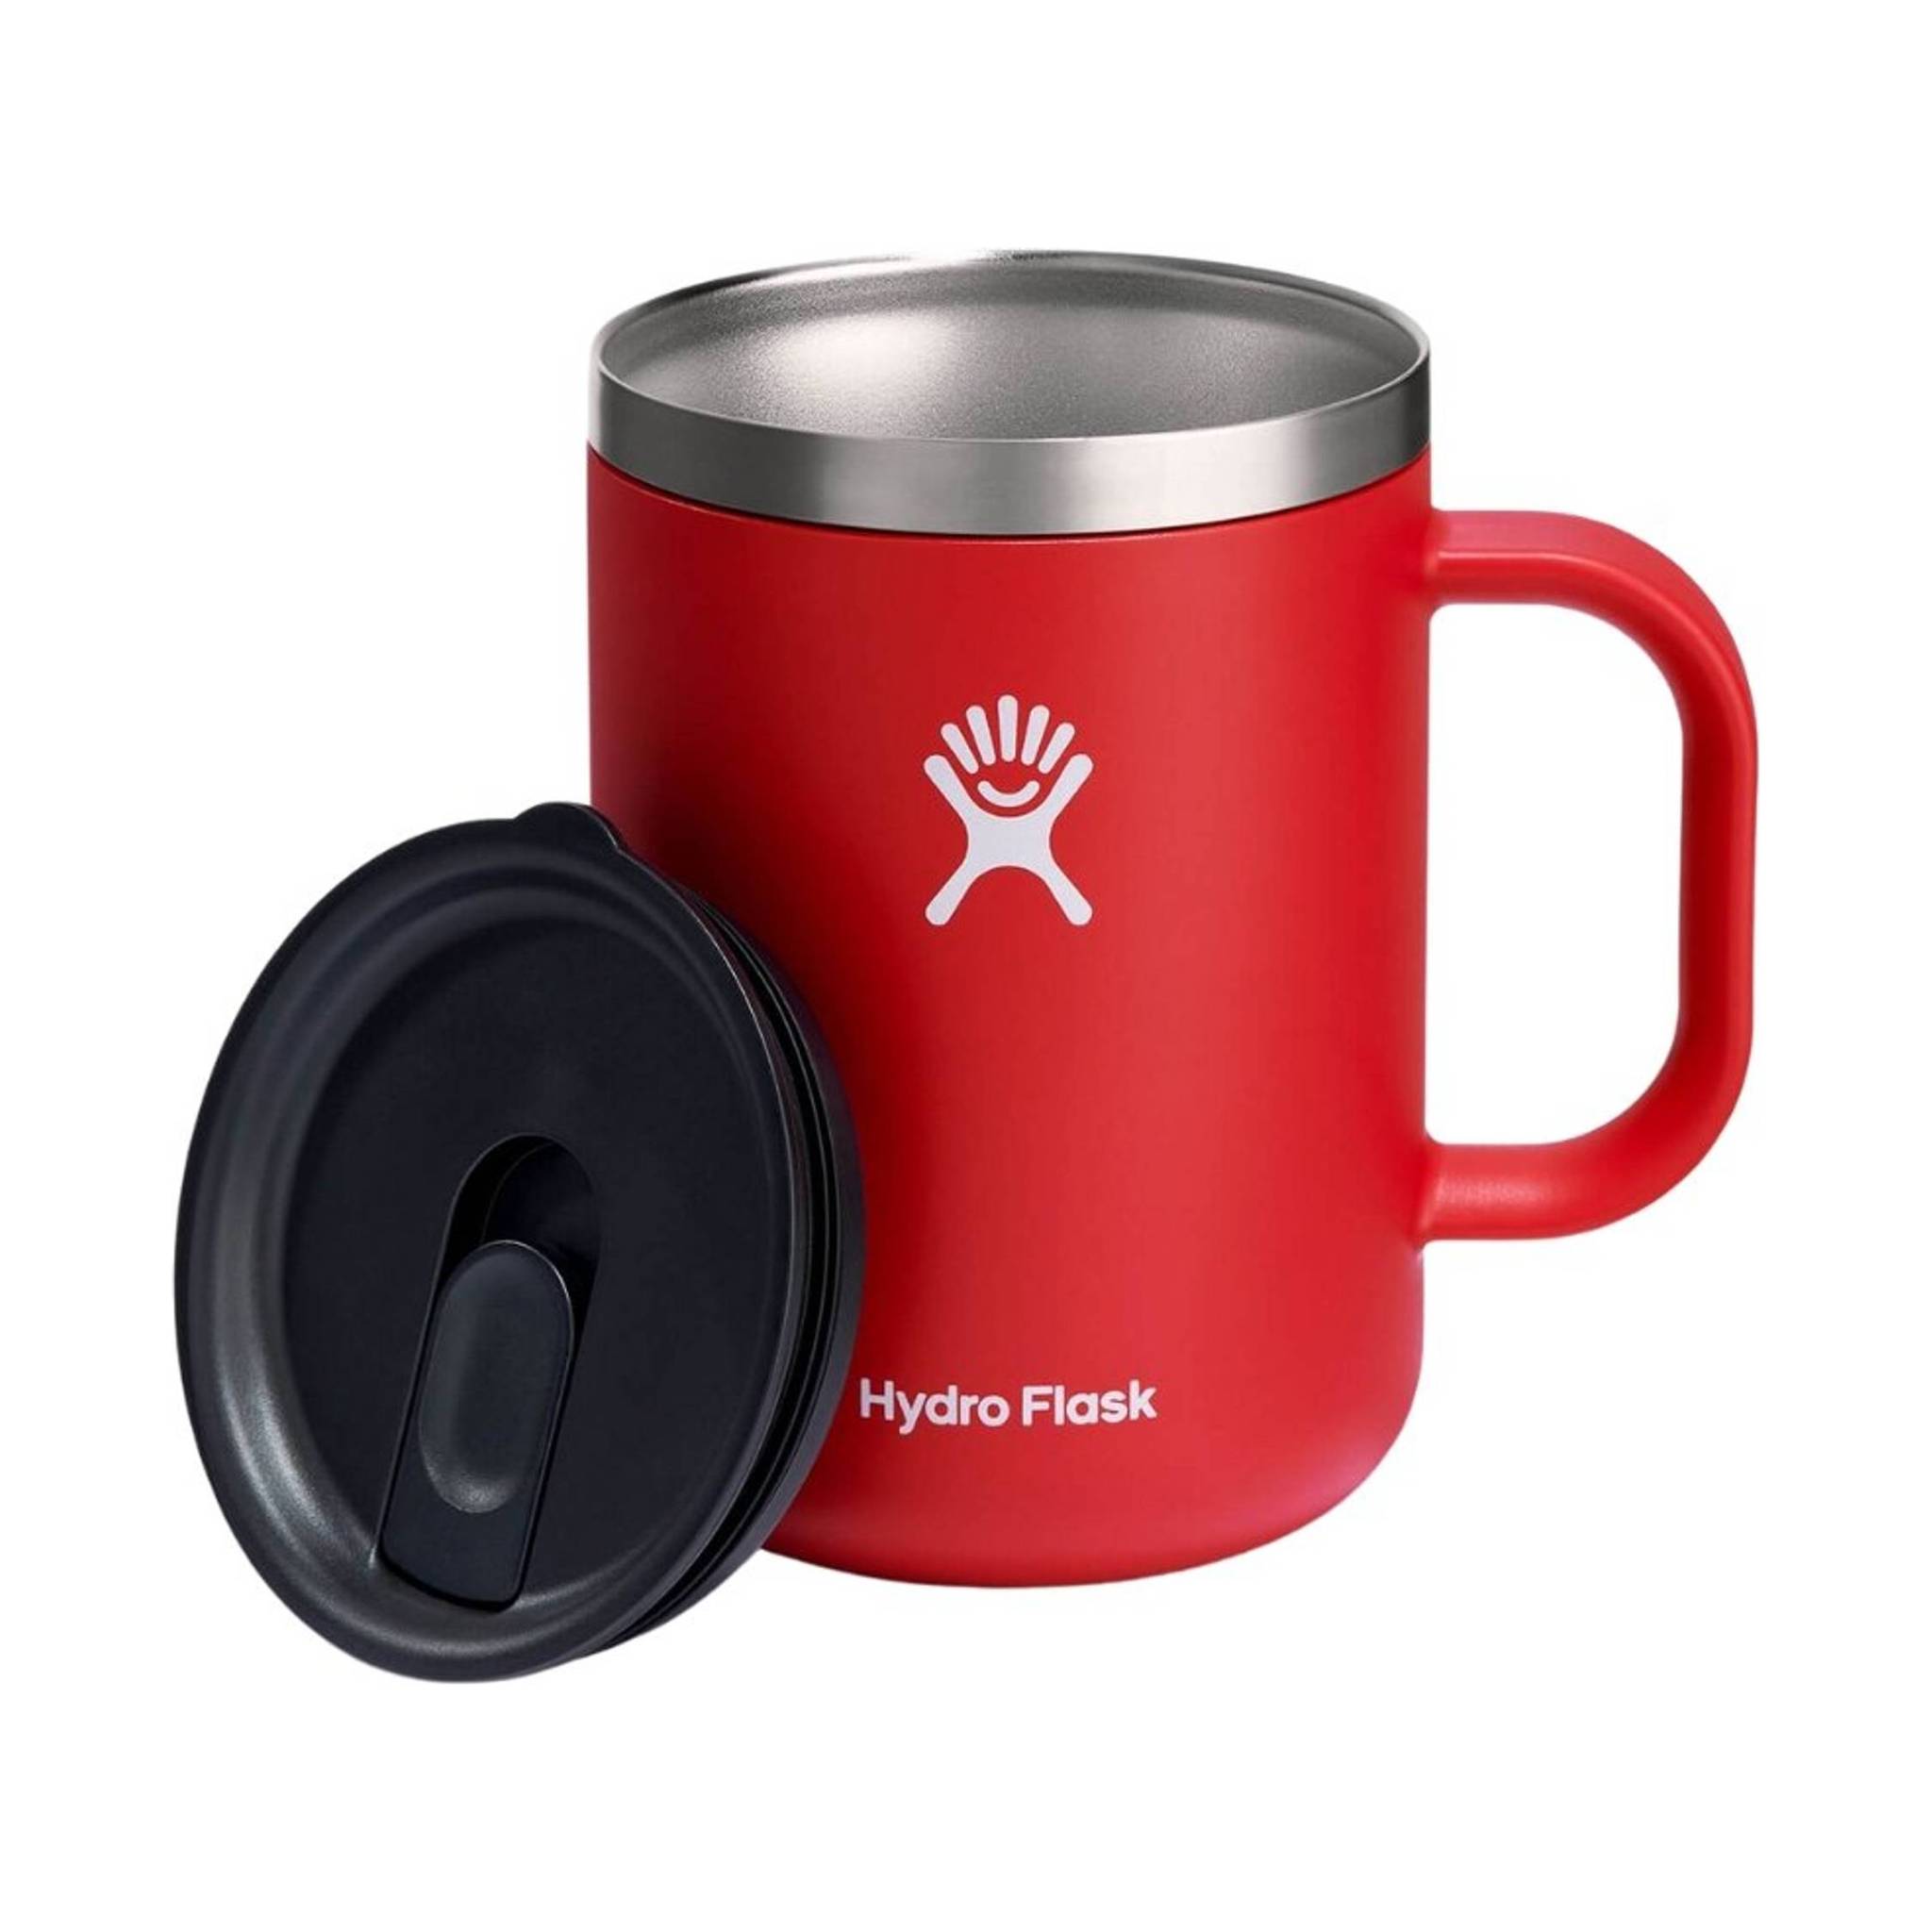 Review – Hydro Flask Coffee Mugs And Flasks